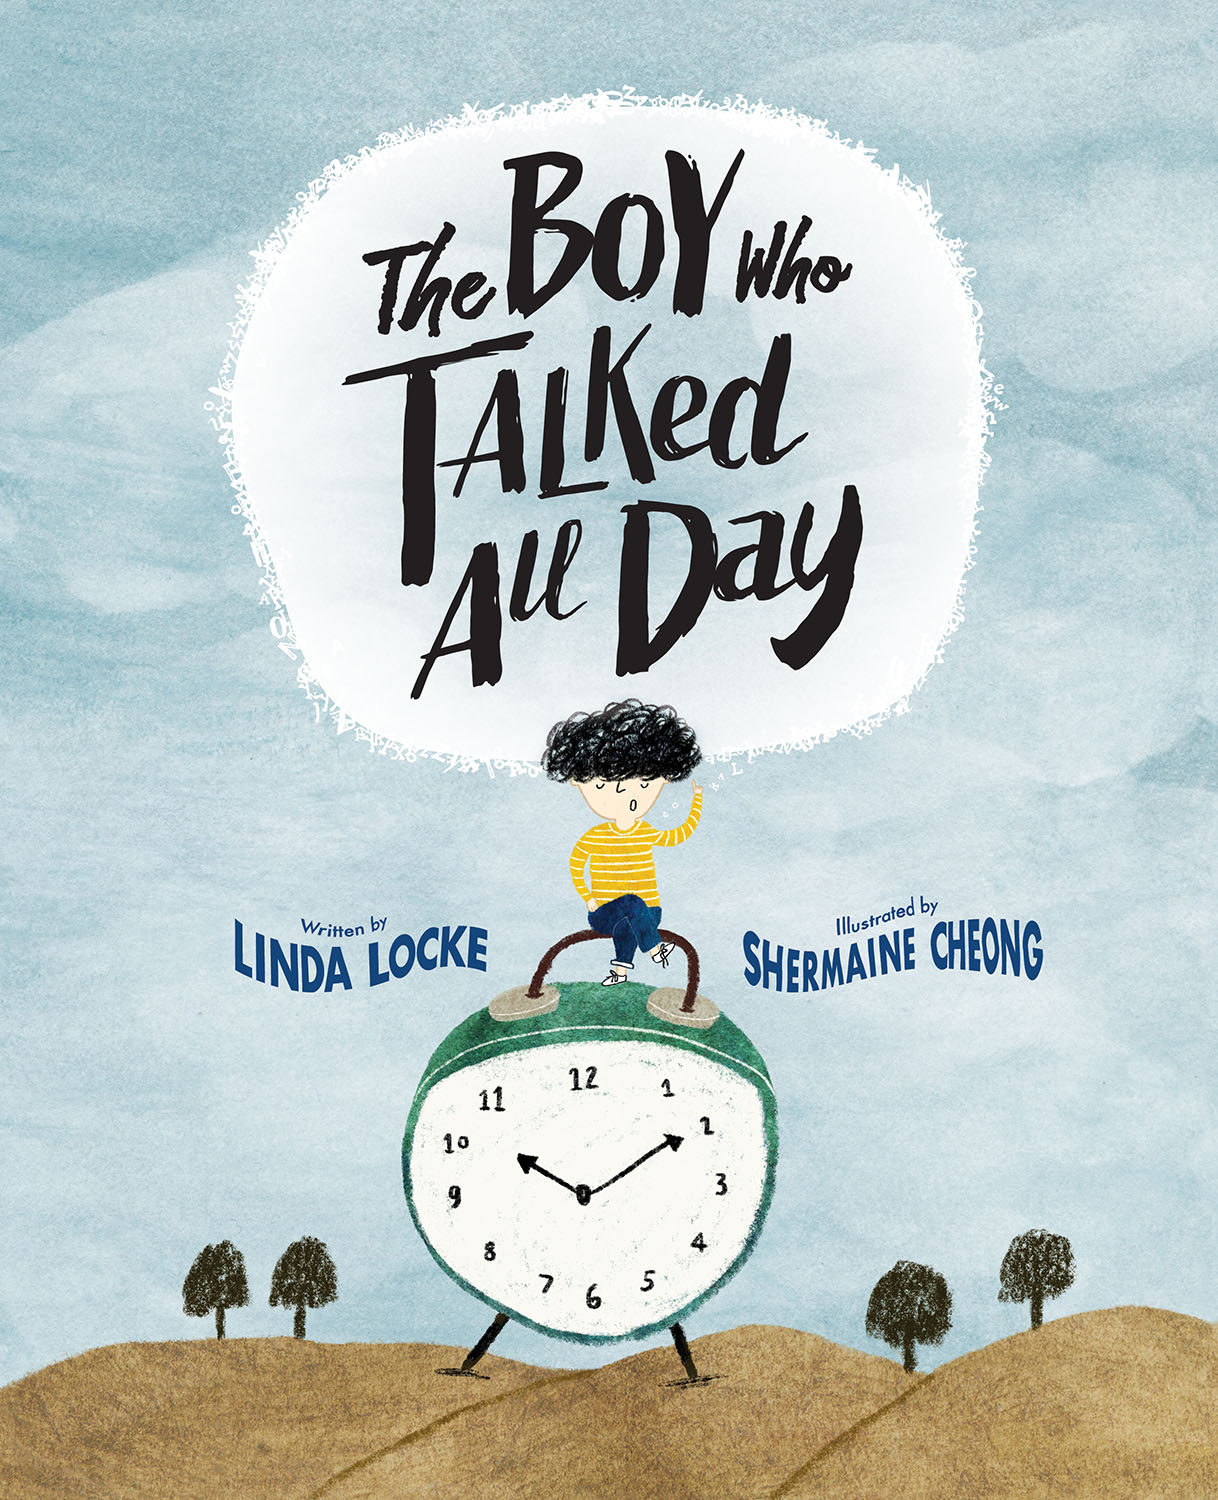 The Boy Who Talked All Day